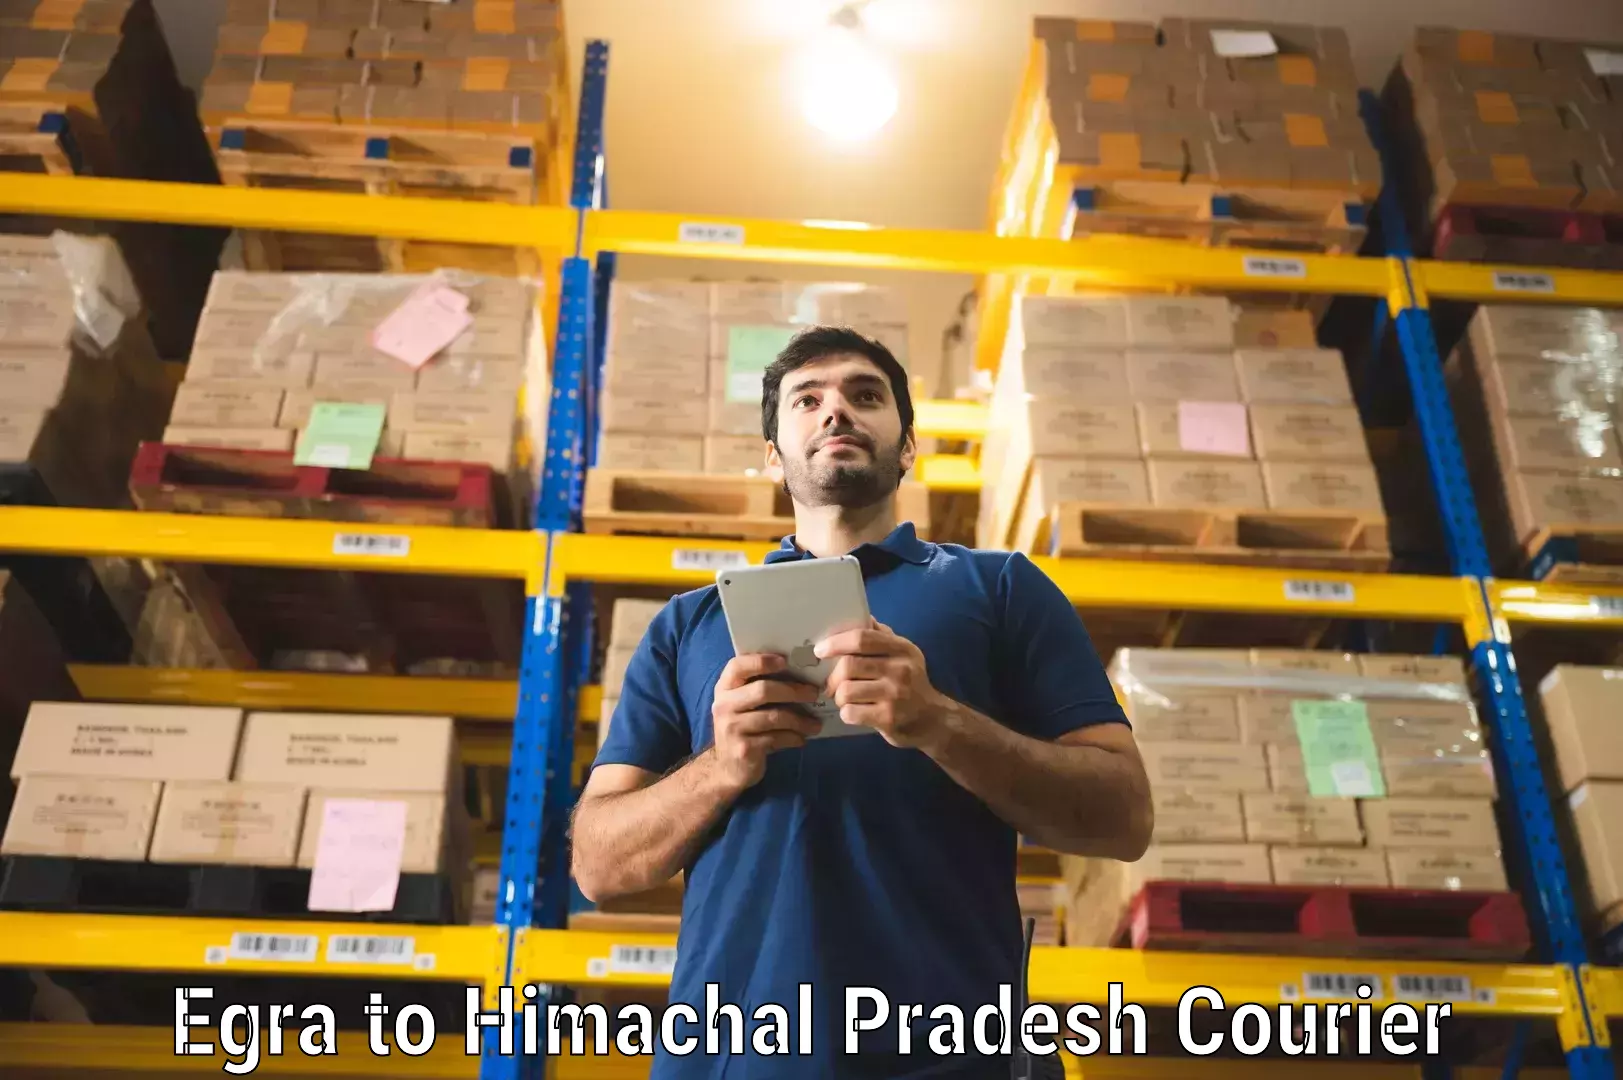 Nationwide delivery network Egra to Himachal Pradesh